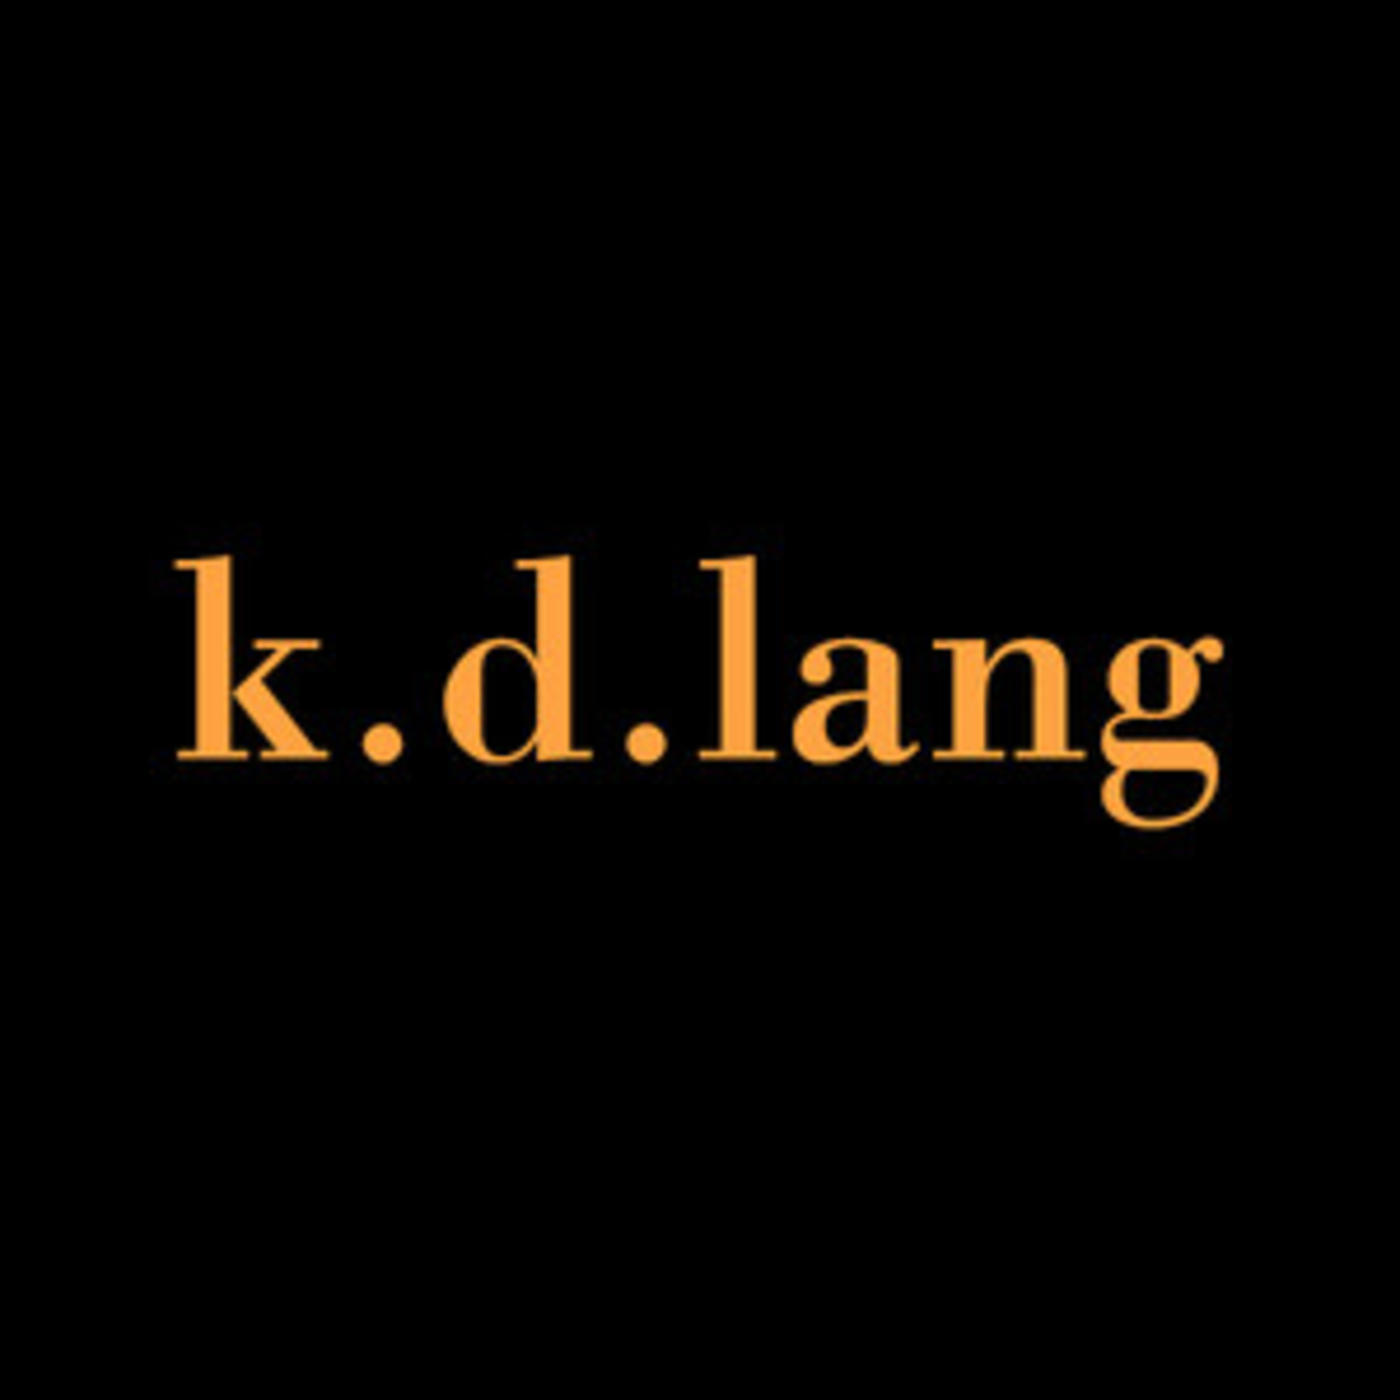 Official k.d. Lang playlist - Constant Craving, Crying, Hallelujah, The Air That I Breathe, Helpless